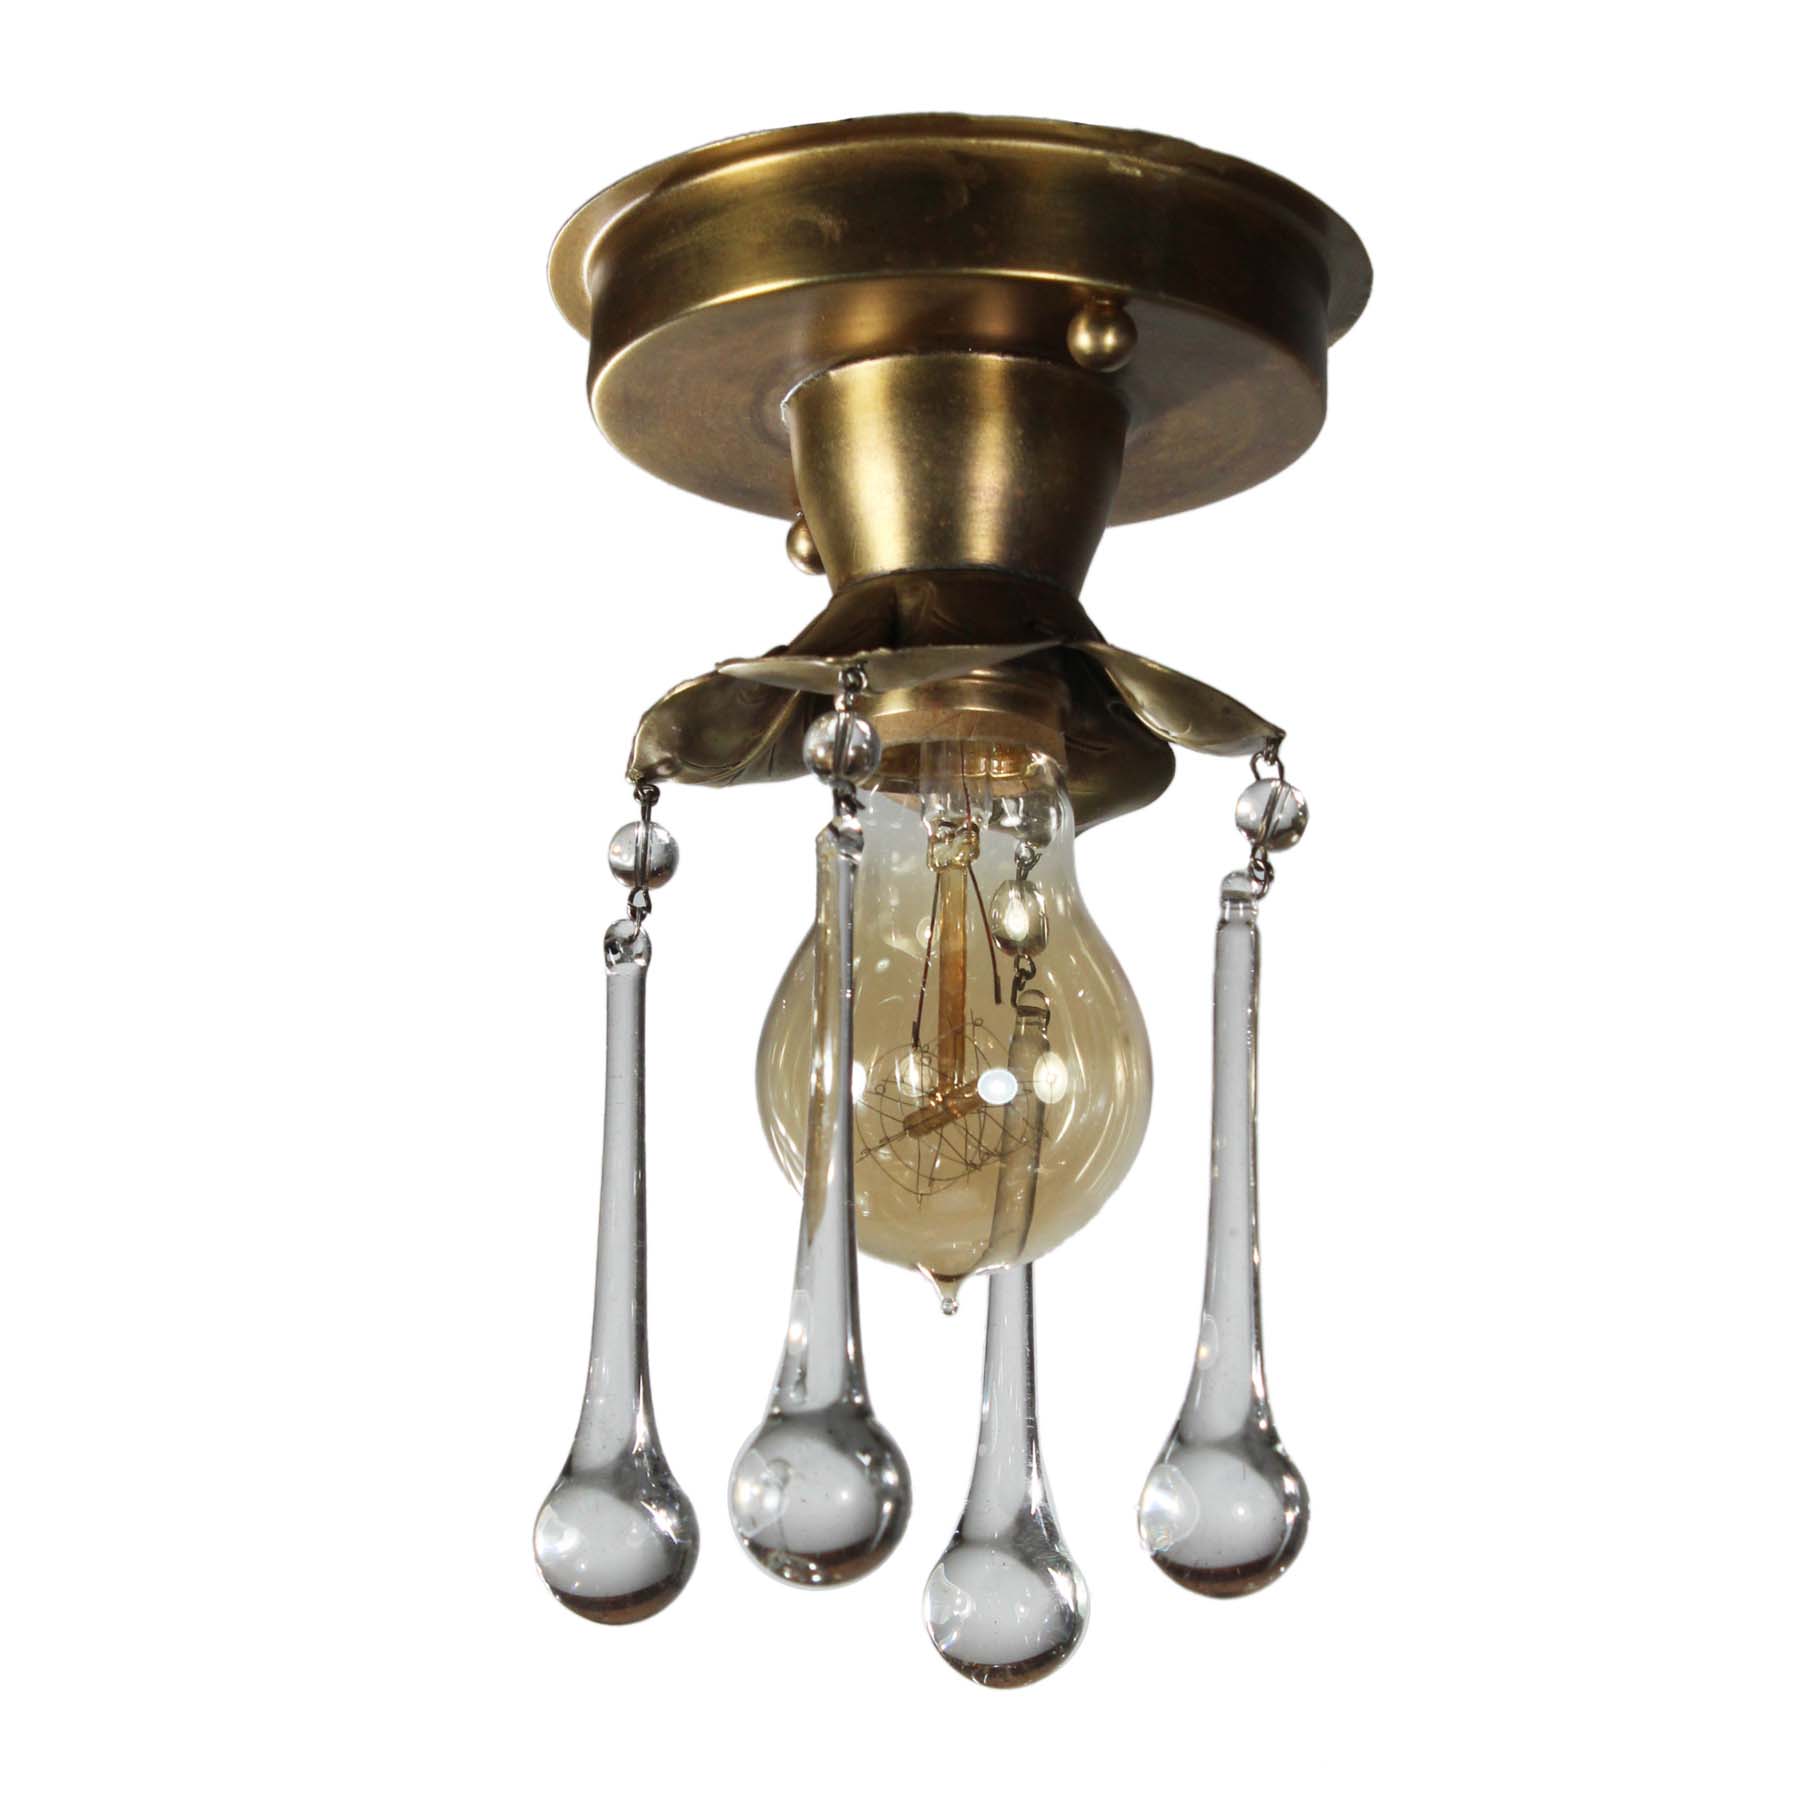 Brass Exposed Bulb Flush-Mount Lights with Teardrop Prisms, Antique Lighting-71372